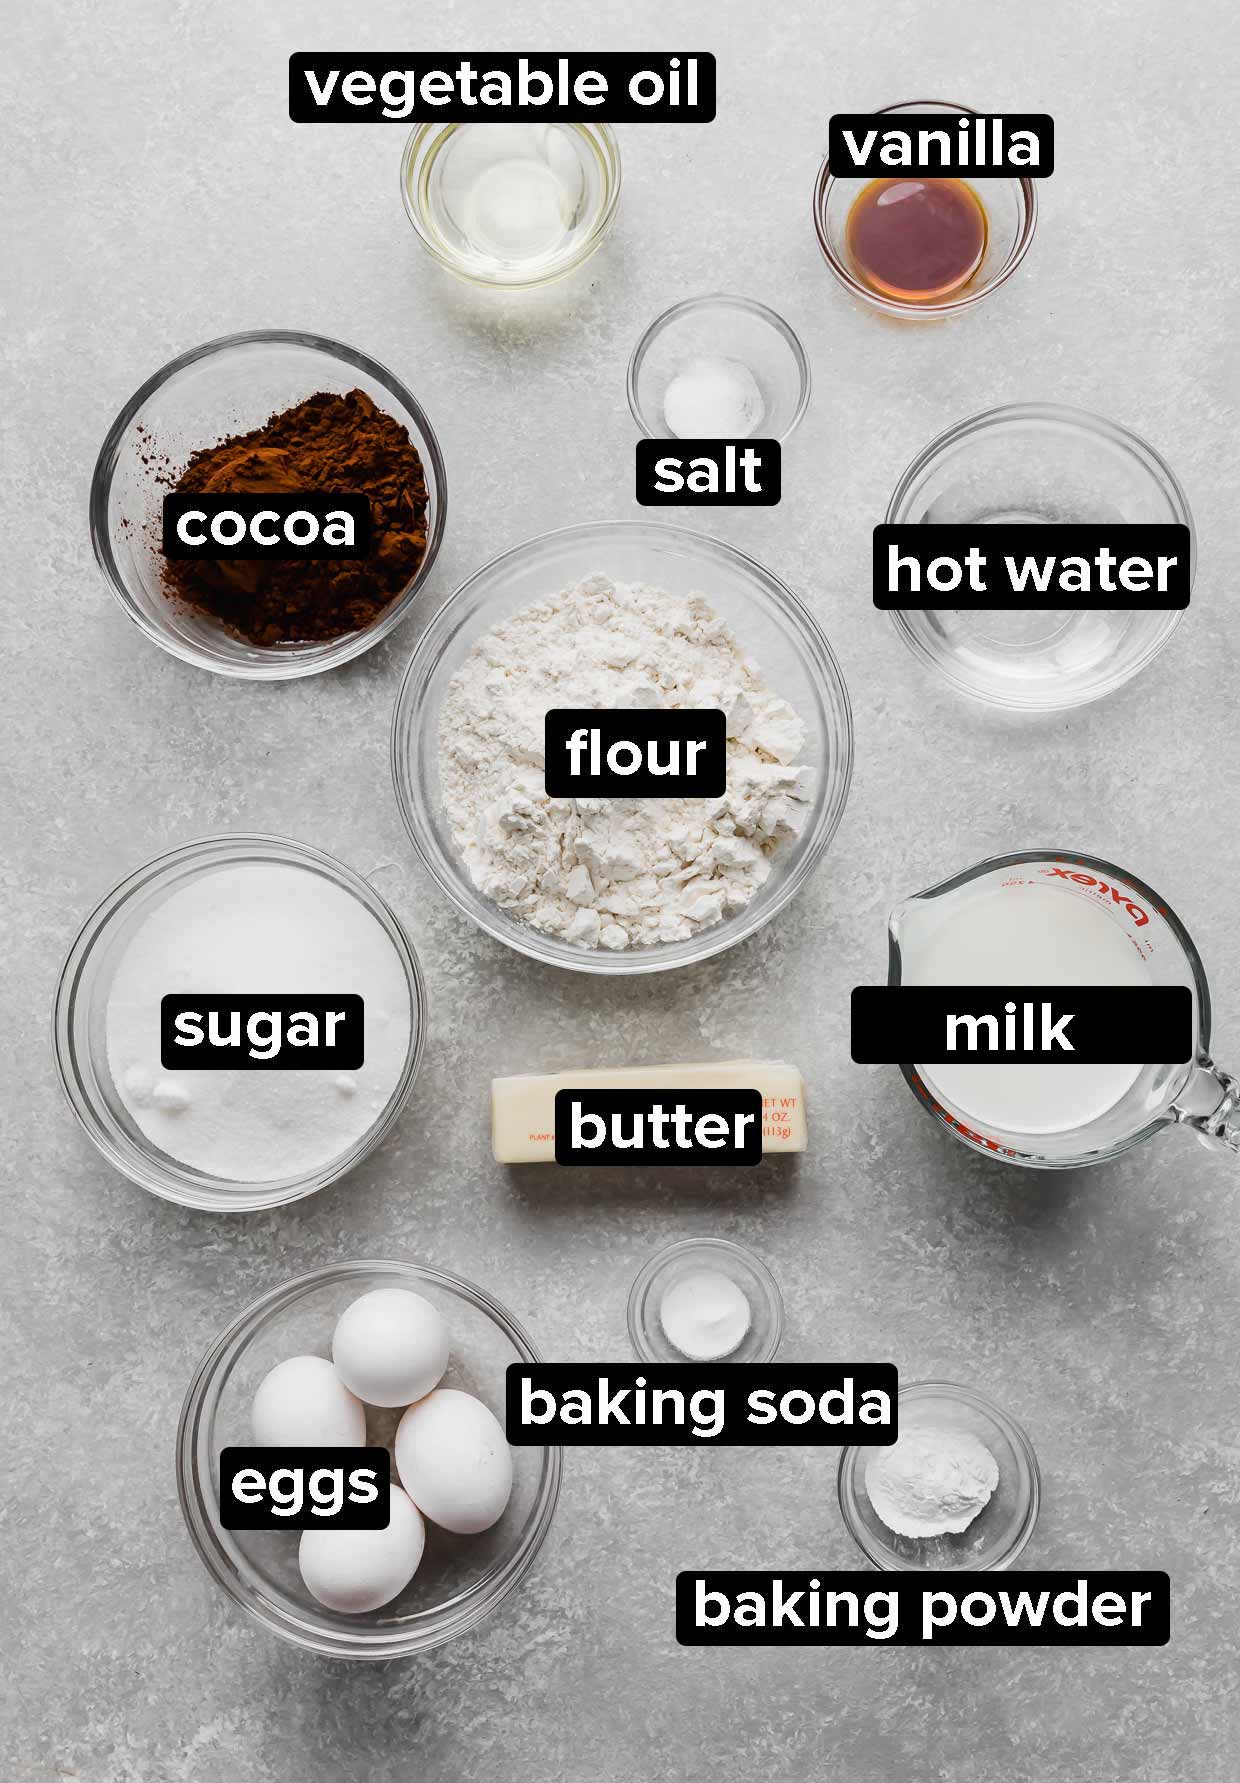 Ingredients used to make Chocolate Cake with Peanut Butter Frosting portioned into glass bowls on a light gray textured background.